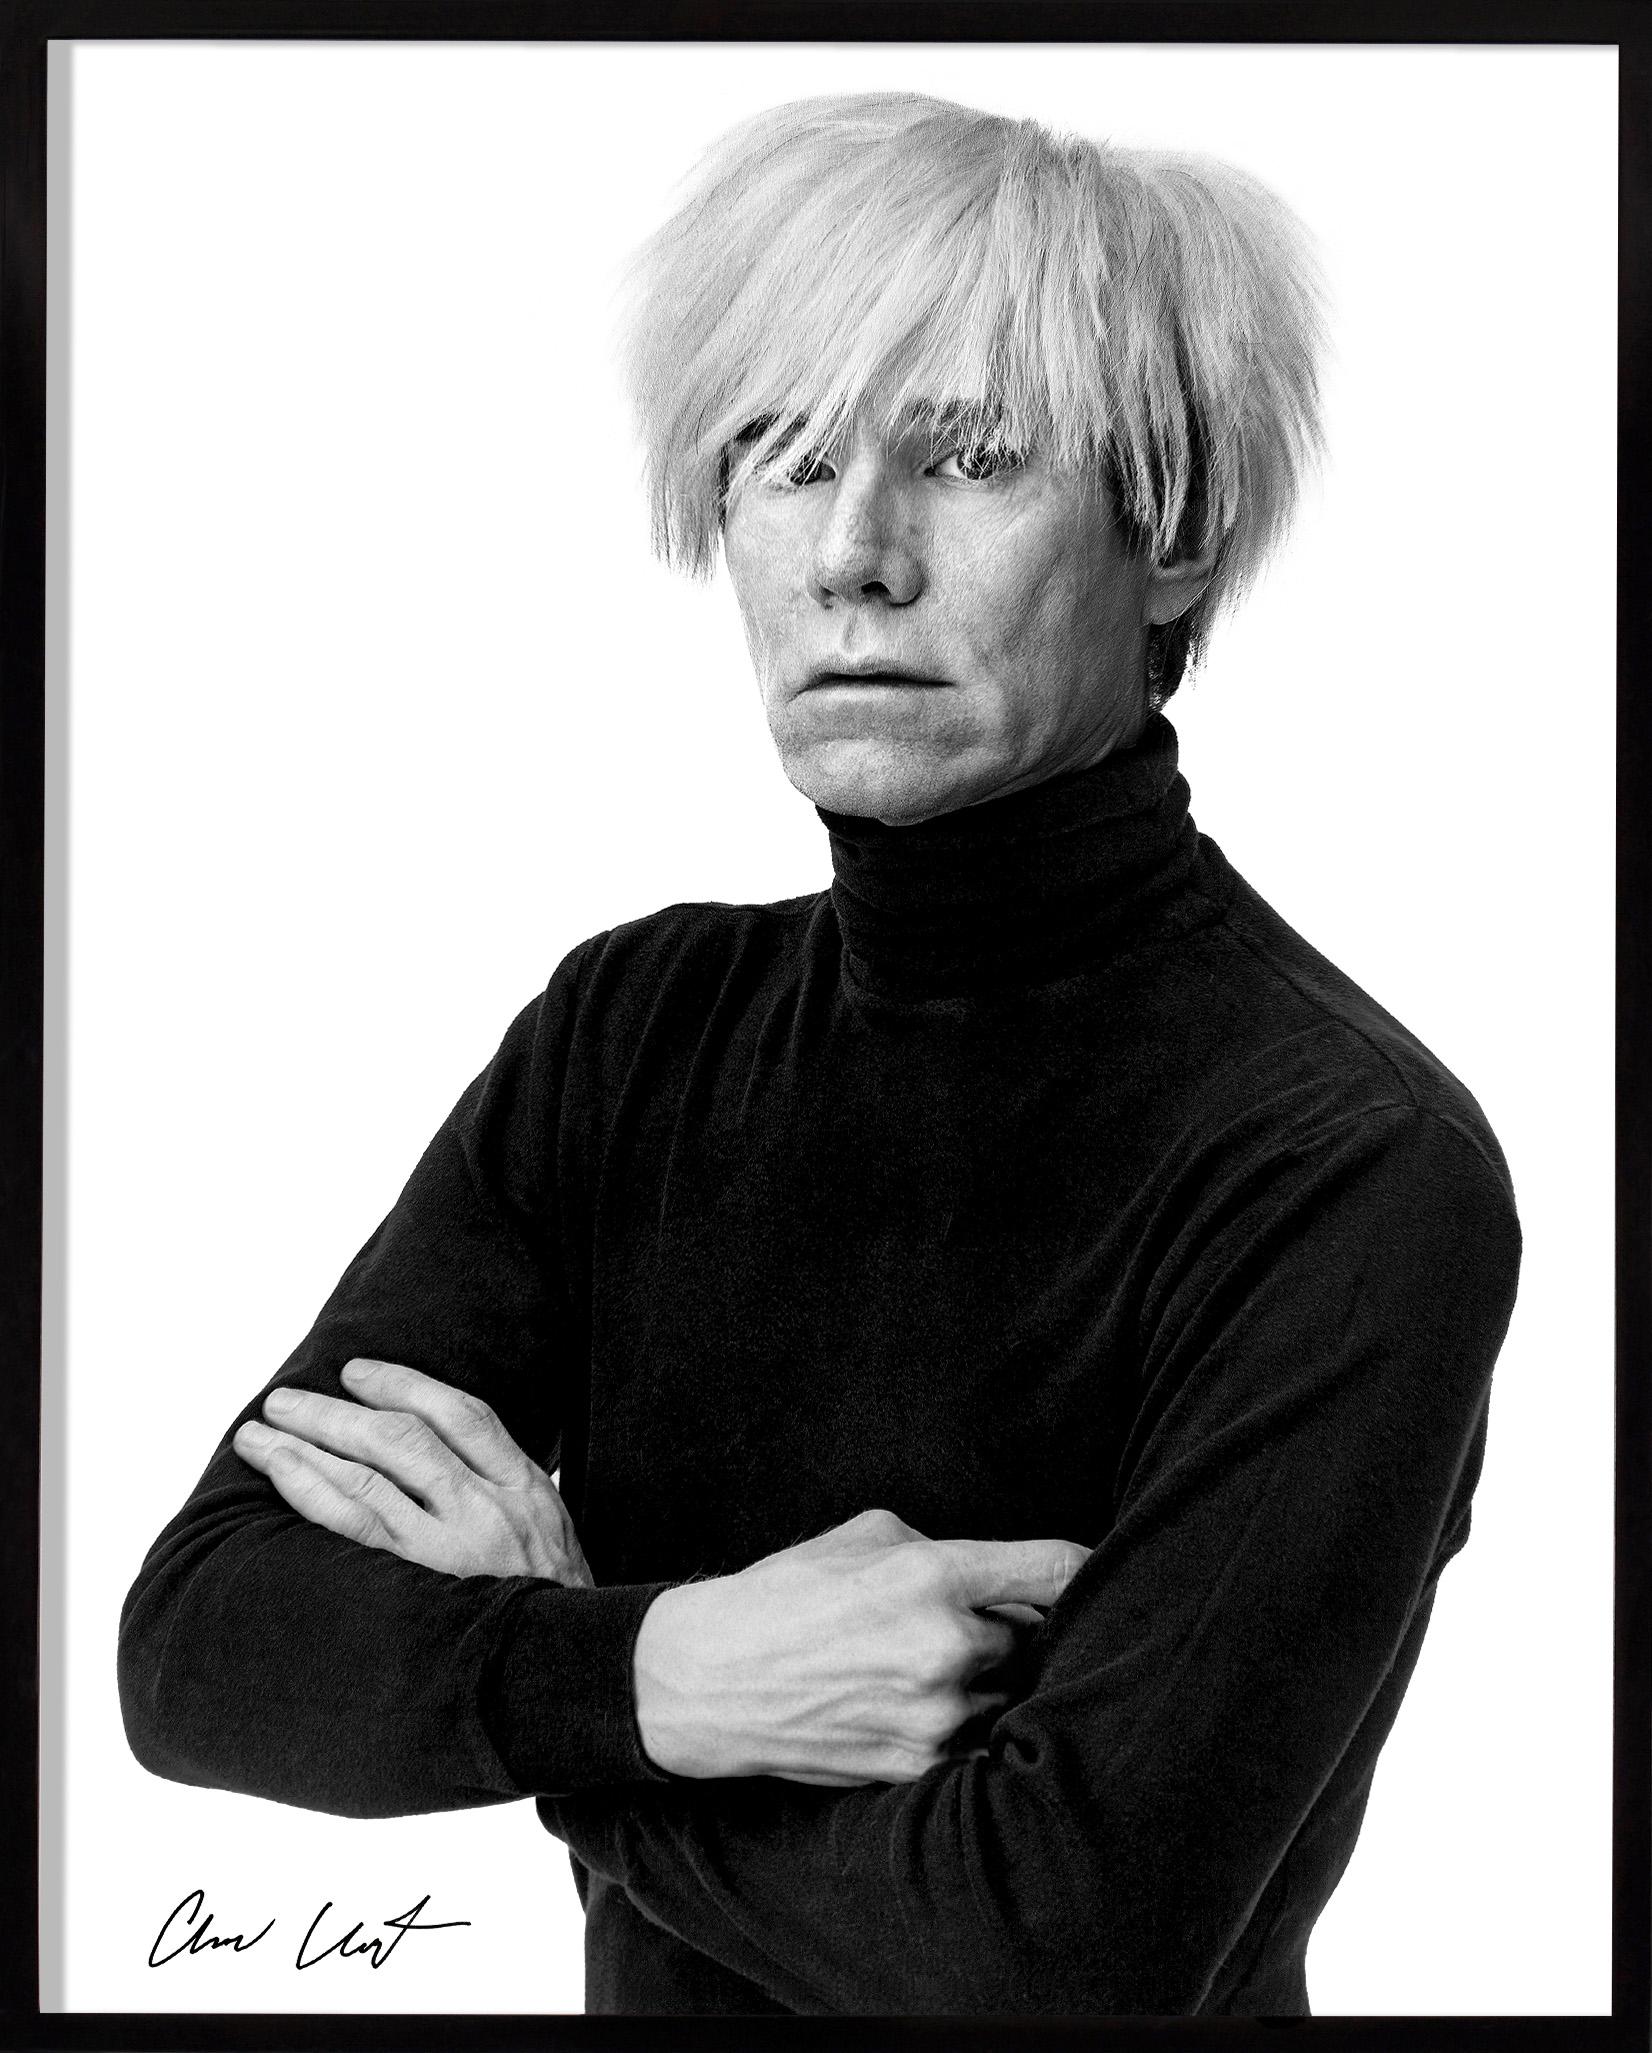 Andrew Unangst 'Archival Portrait of Andy Warhol' Photographic Print, 1985/2017